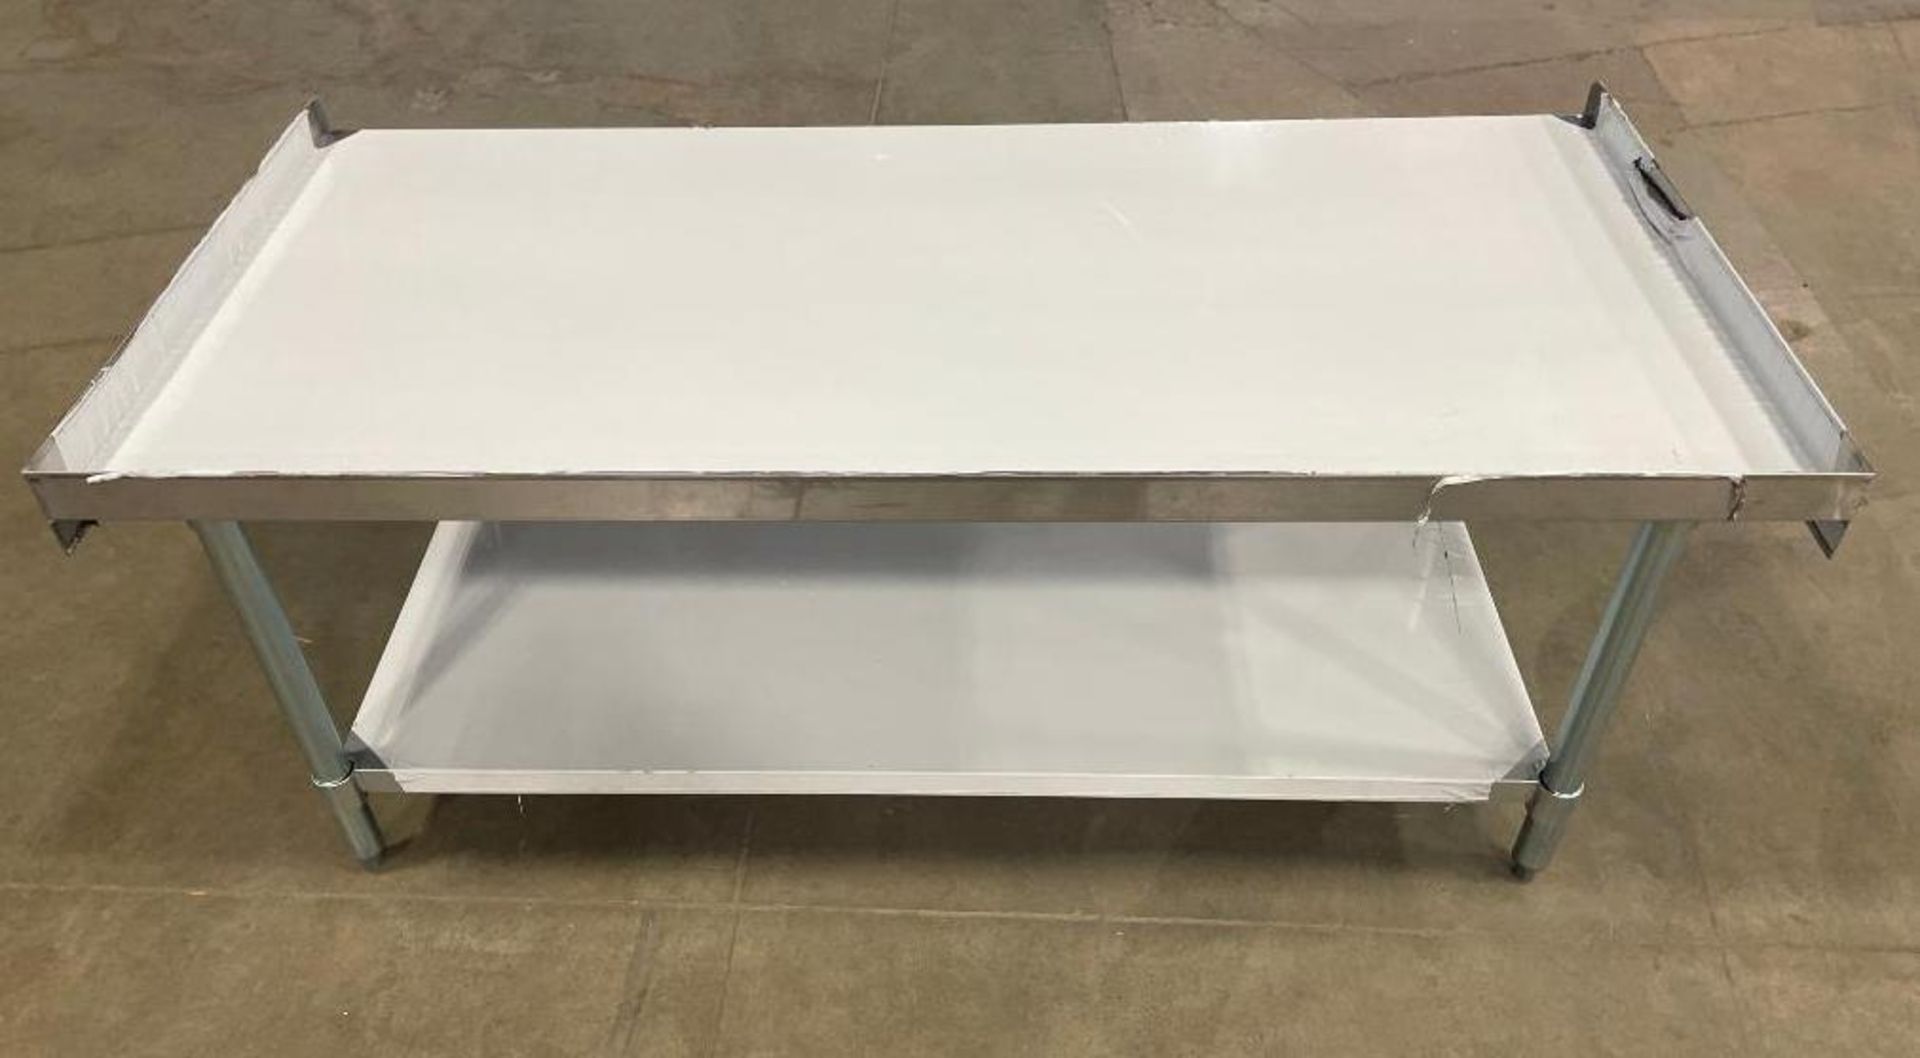 CHEF'S MATE 30" X 60" STAINLESS STEEL EQUIPMENT STAND - NEW - Image 12 of 13